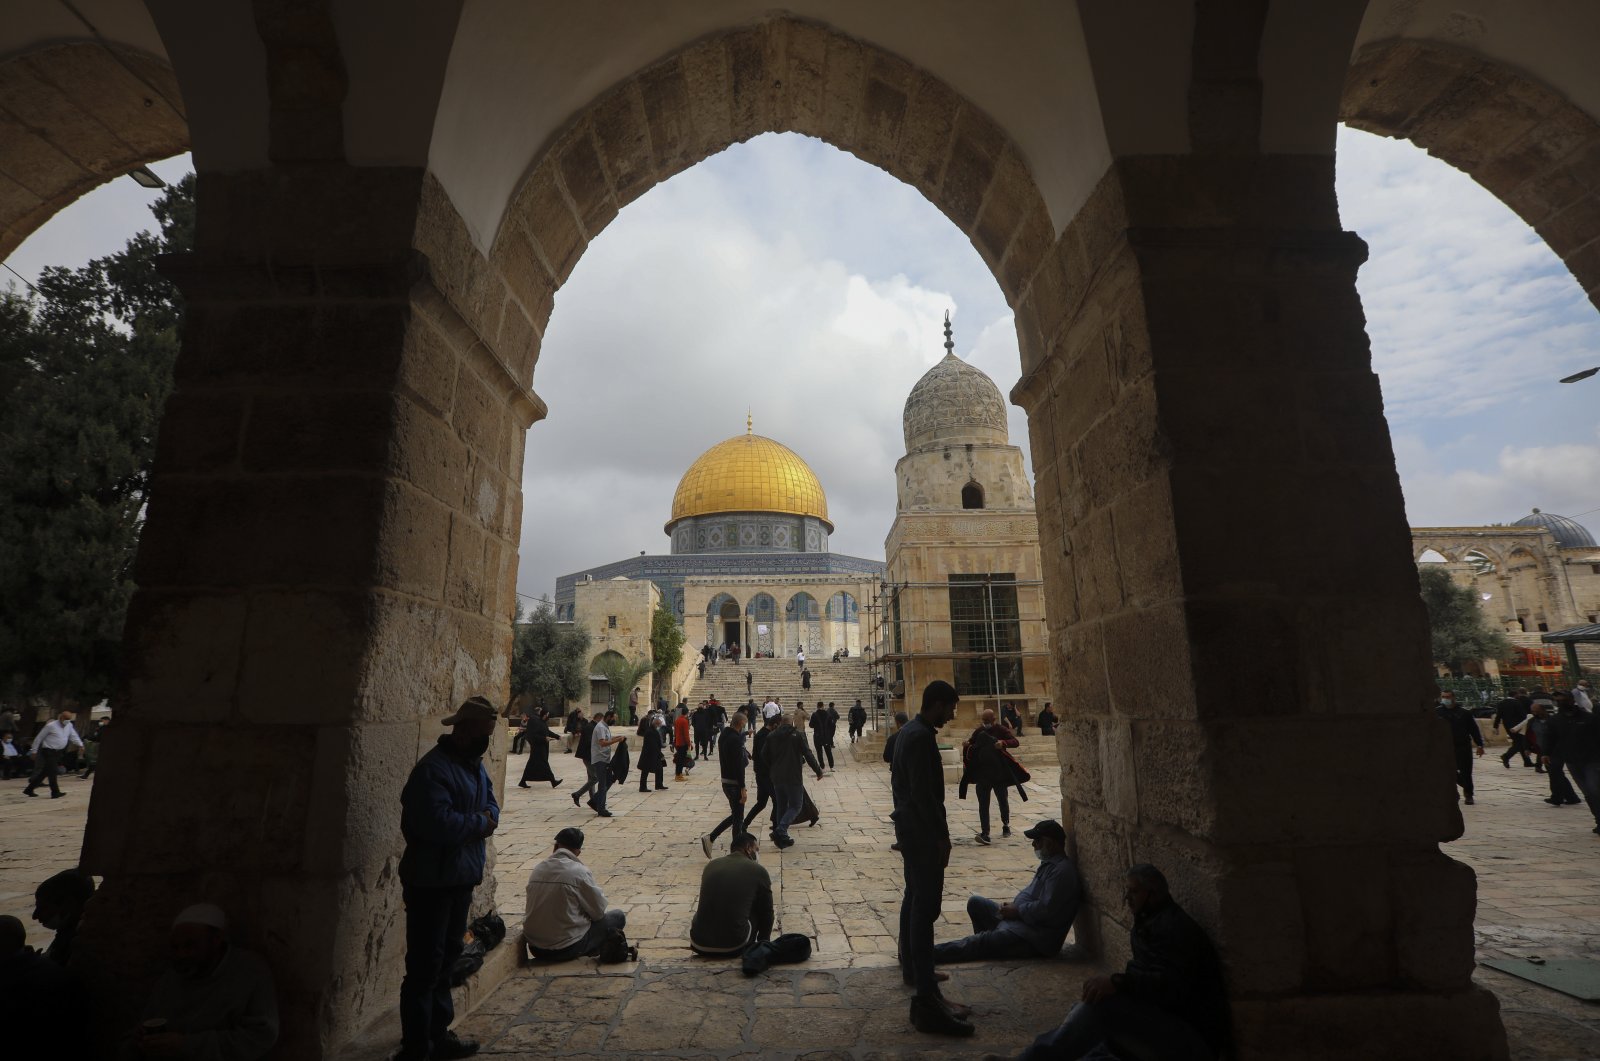 Muslims gather for Friday prayer next to the Dome of the Rock Mosque in the Al-Aqsa Mosque compound in the Old City, Israeli-occupied Jerusalem, Palestine, Nov. 6, 2020. (AP Photo)